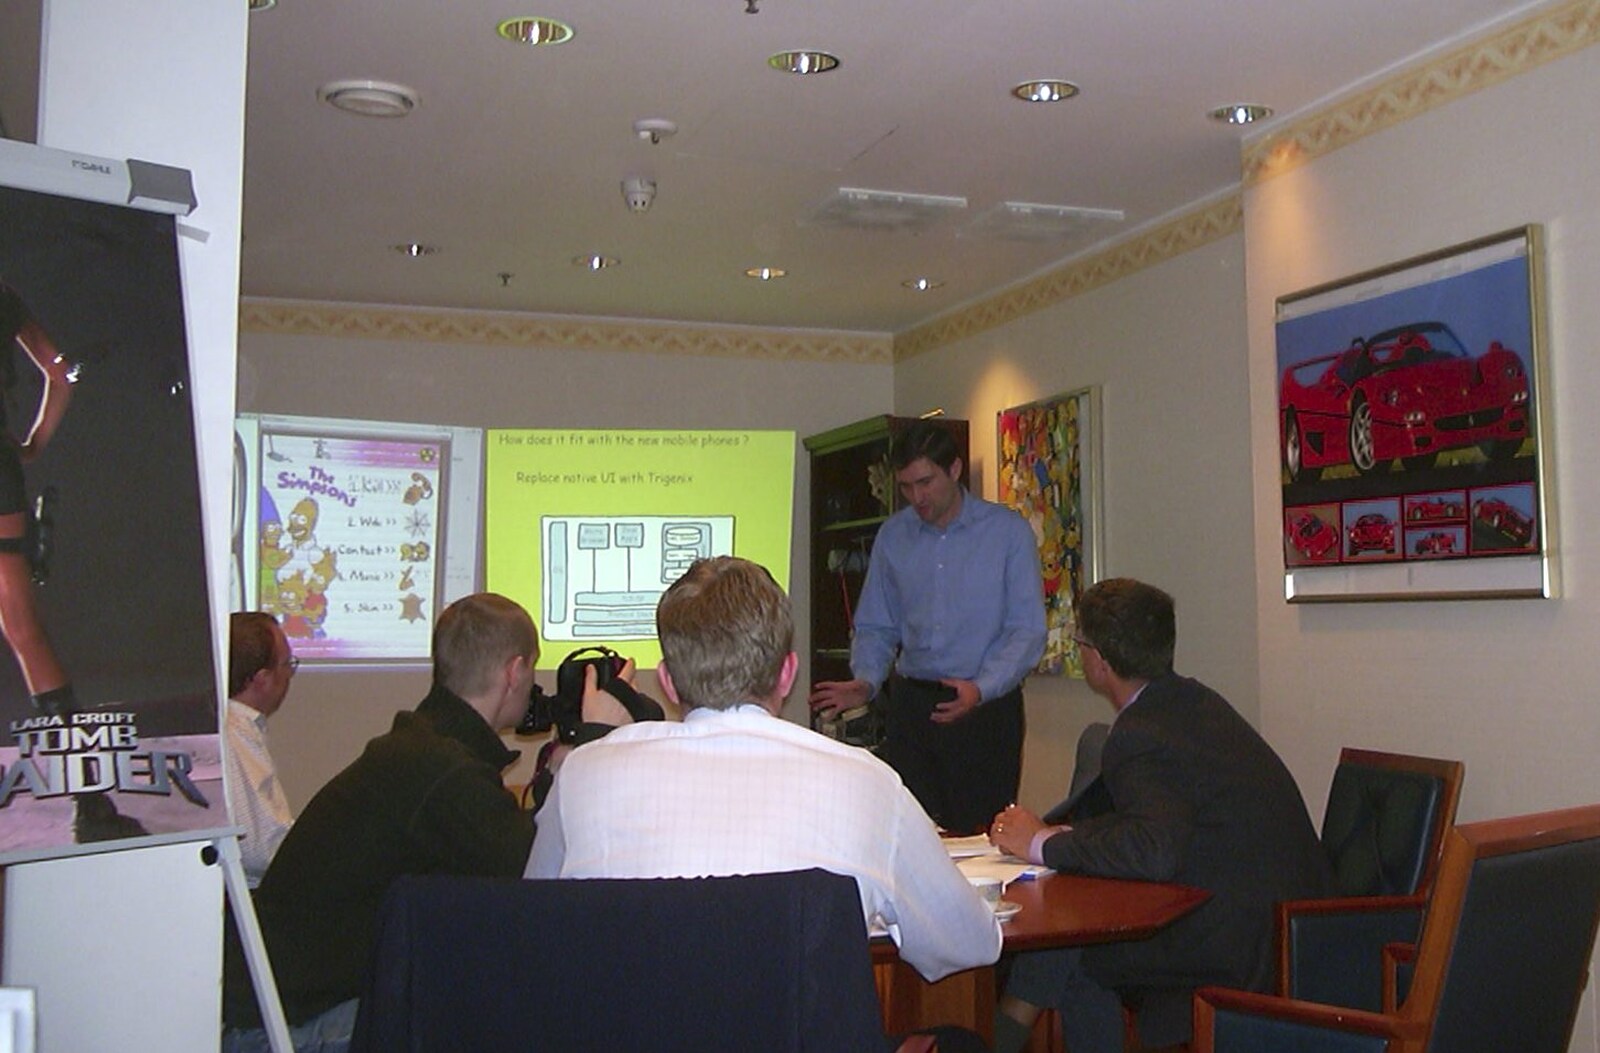 Bob does a presentation from A 3G Lab Press Tour of Helsinki and Stockholm, Finland and Sweden - 12th March 2001